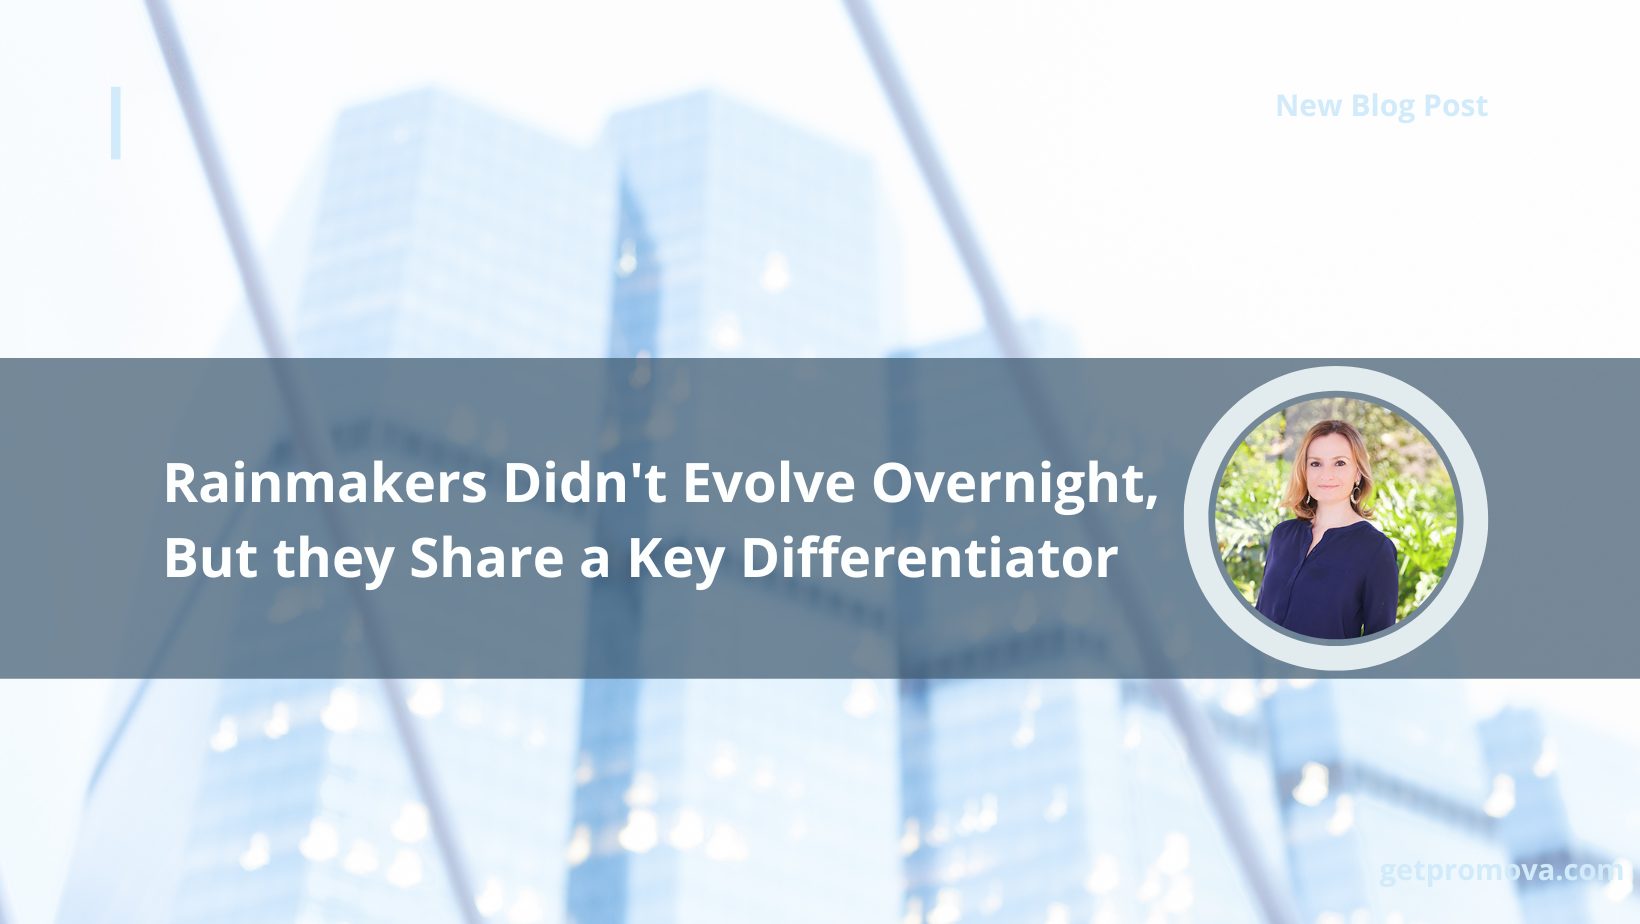 Featured image for “Rainmakers Didn’t Evolve Overnight, But they Share a Key Differentiator”